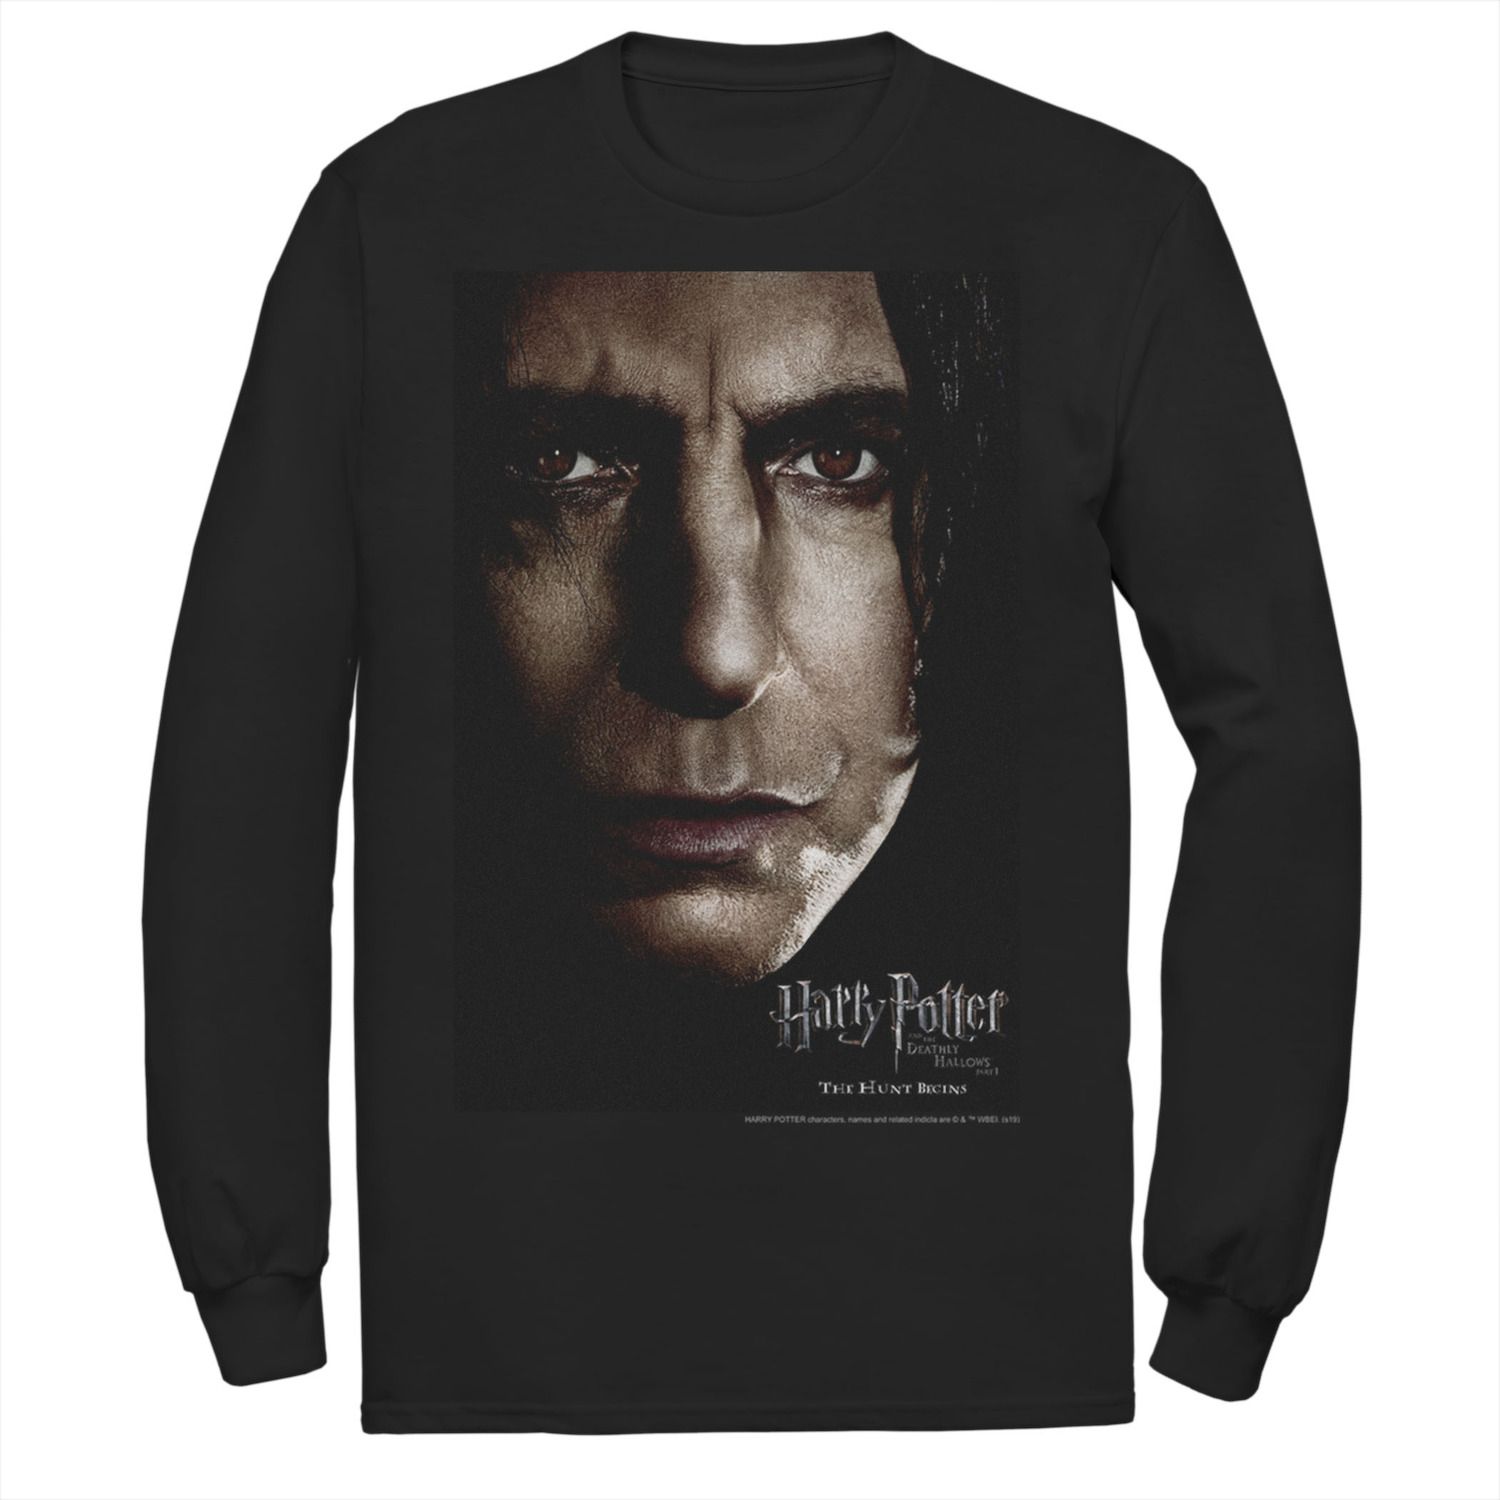 Image for Harry Potter Men's Deathly Hallows Snape Character Poster Long Sleeve Graphic Tee at Kohl's.